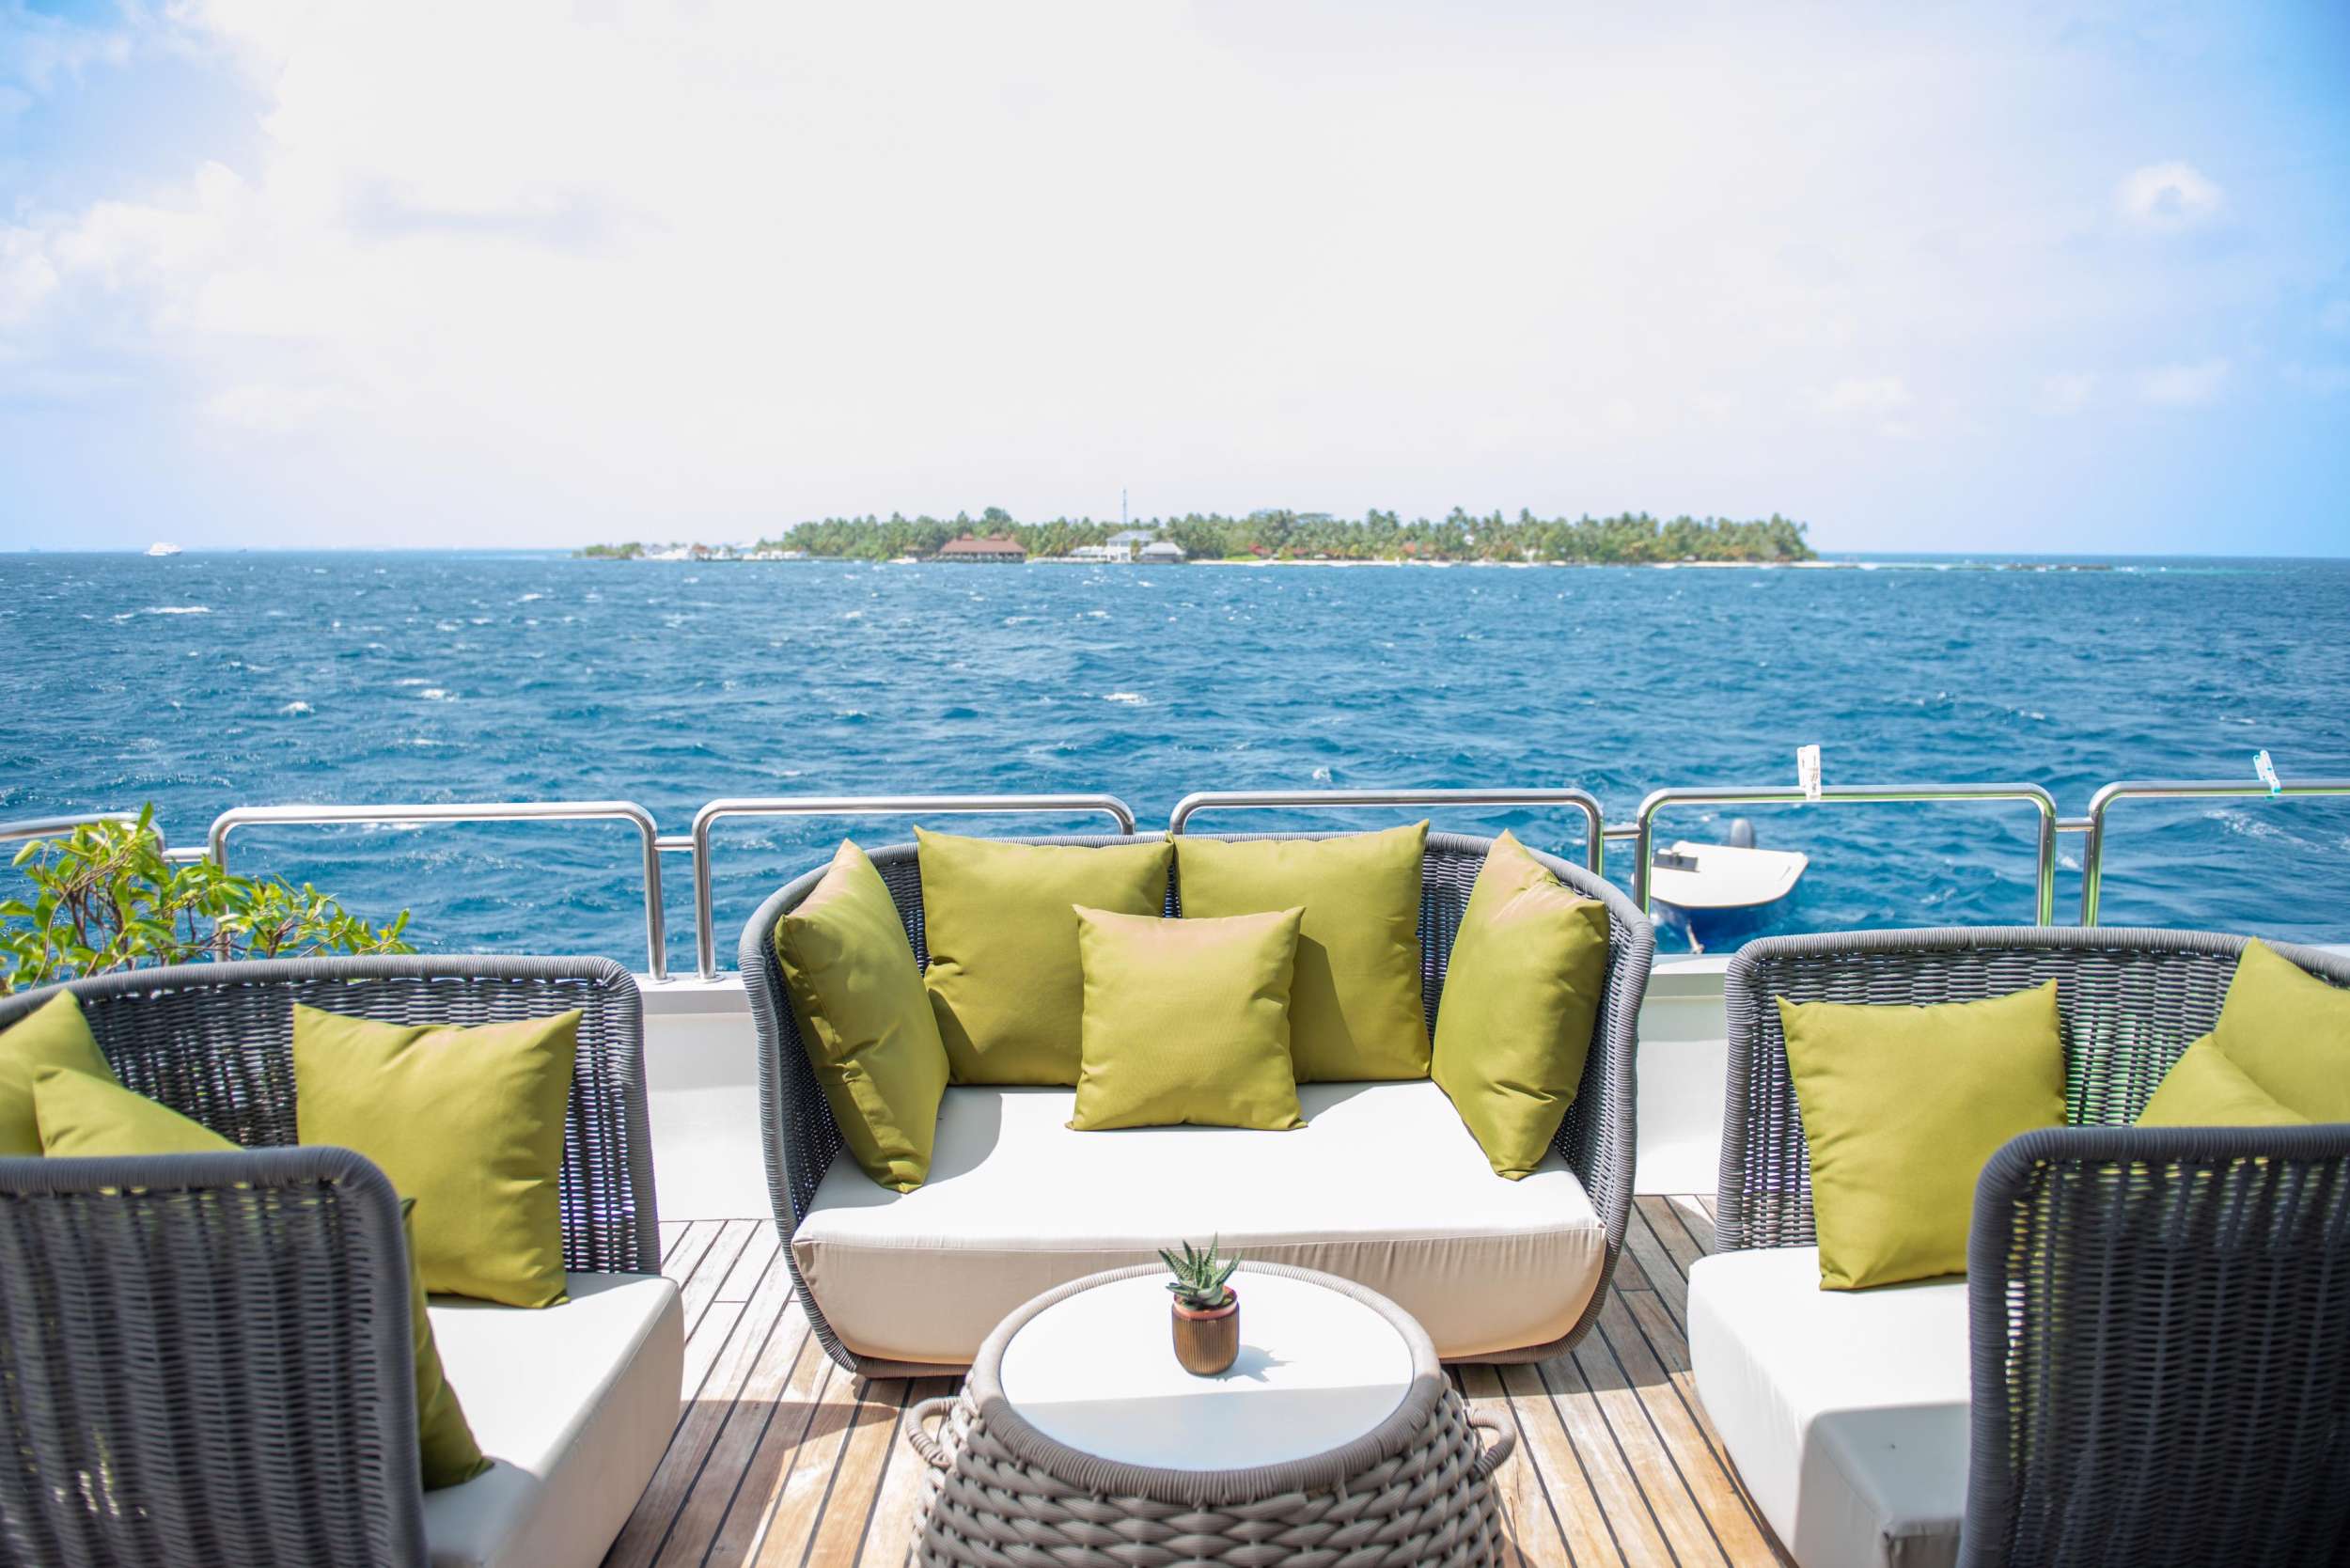 ARK NOBLE - Yacht Charter Koh Samui & Boat hire in Indian Ocean & SE Asia 6